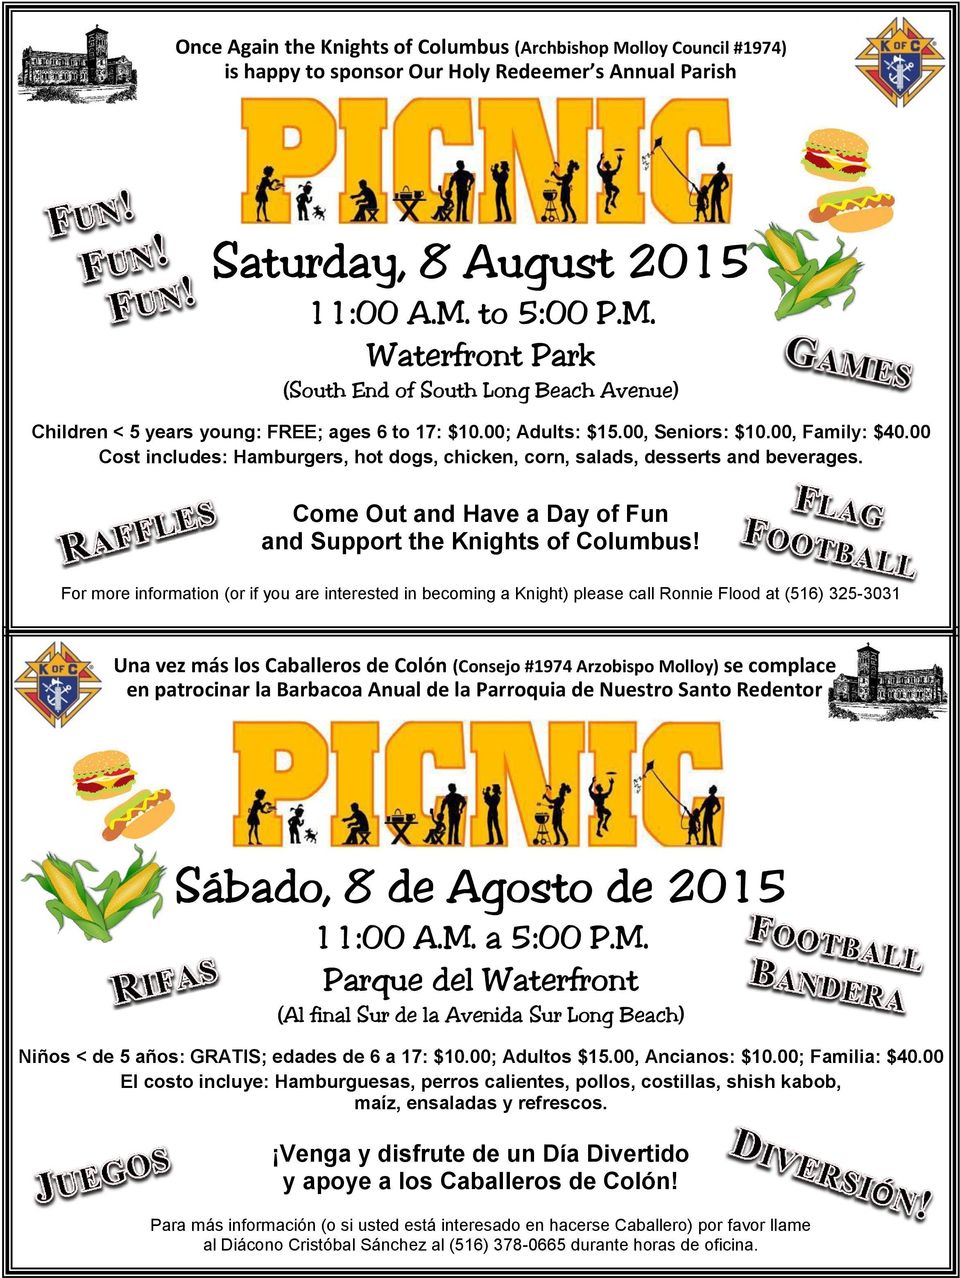 Come Out and Have a Day of Fun and Support the Knights of Columbus!